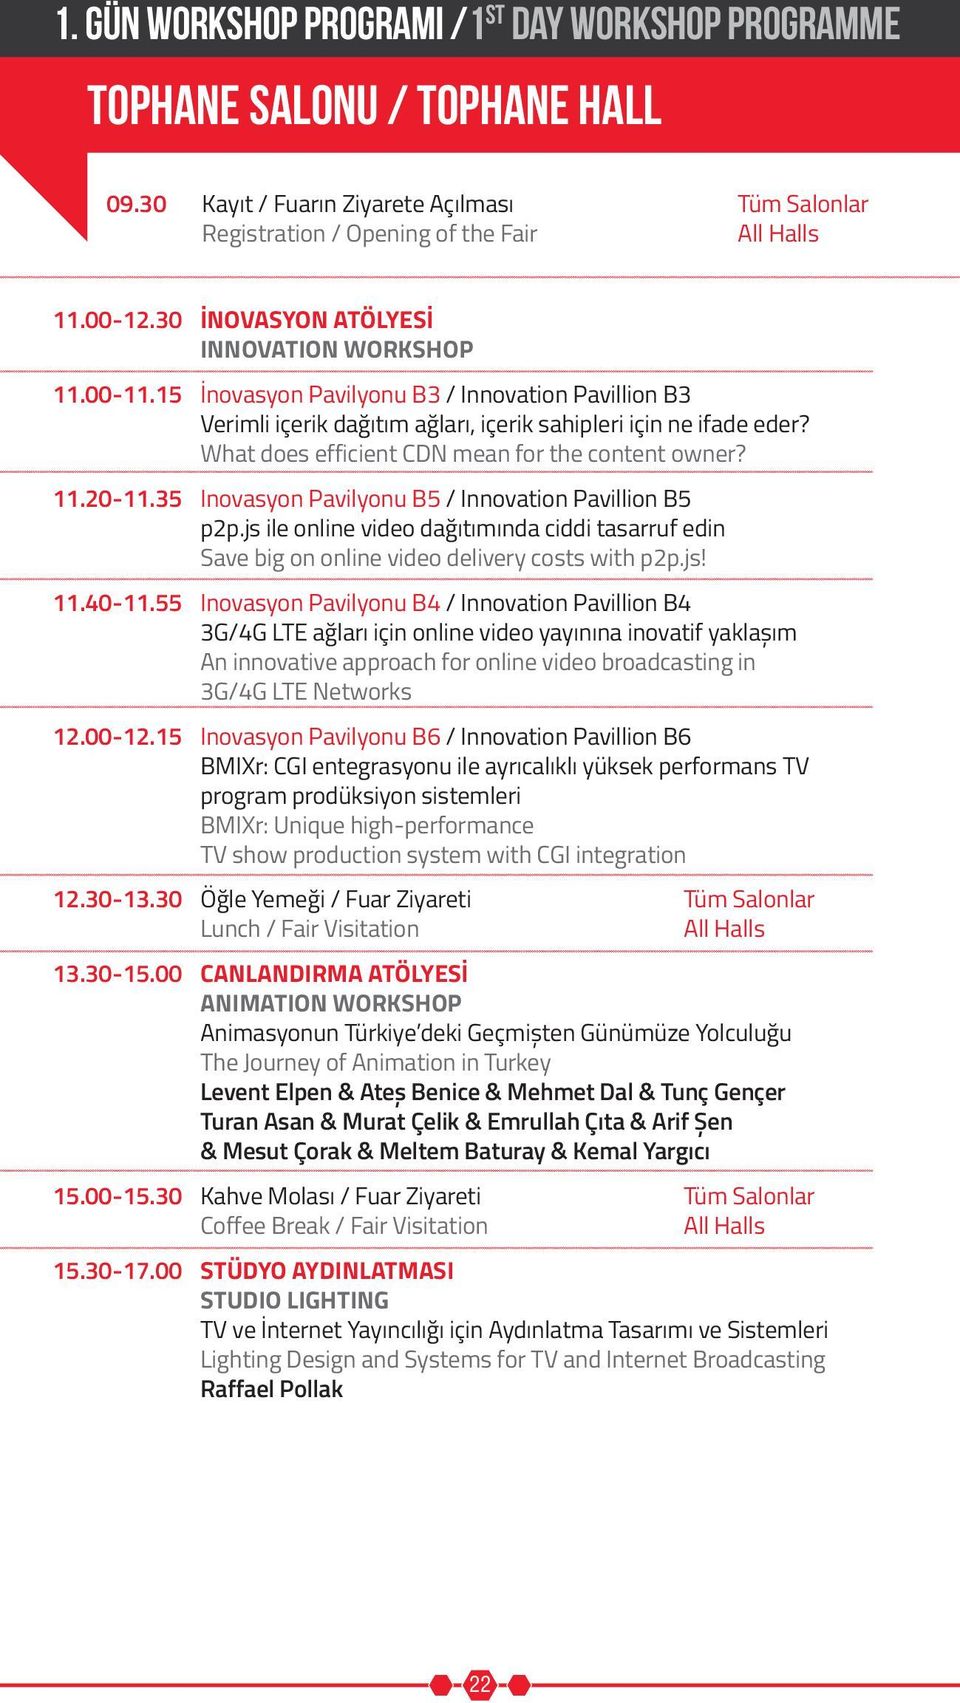 What does efficient CDN mean for the content owner? 11.20-11.35 Inovasyon Pavilyonu B5 / Innovation Pavillion B5 p2p.